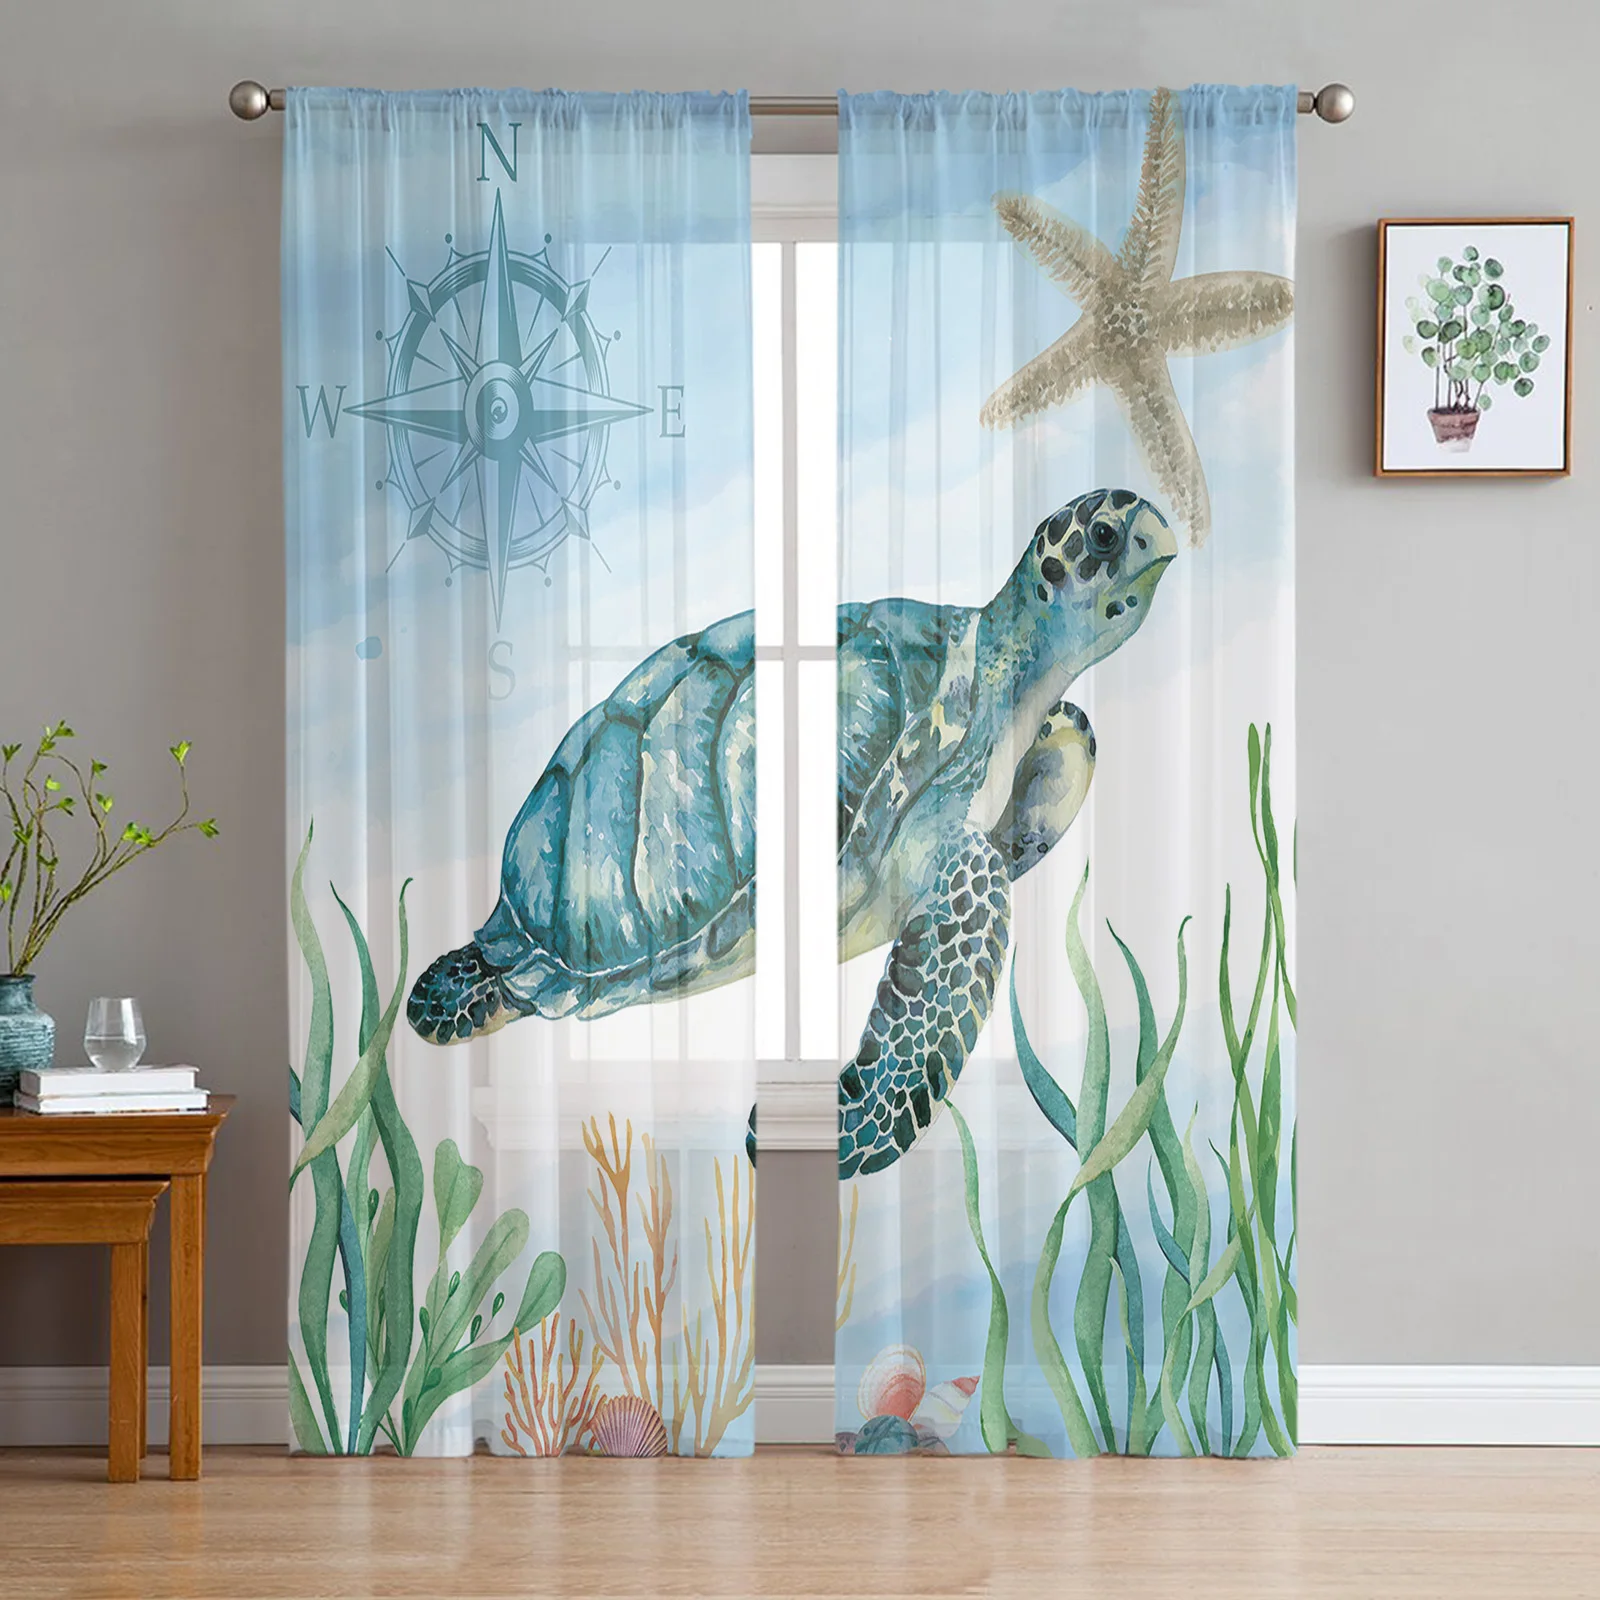 

Sea Turtle Starfish Coral Chiffon Sheer Curtains For Living Room Bedroom Kitchen Decoration Window Voiles Organza Tulle Curtain